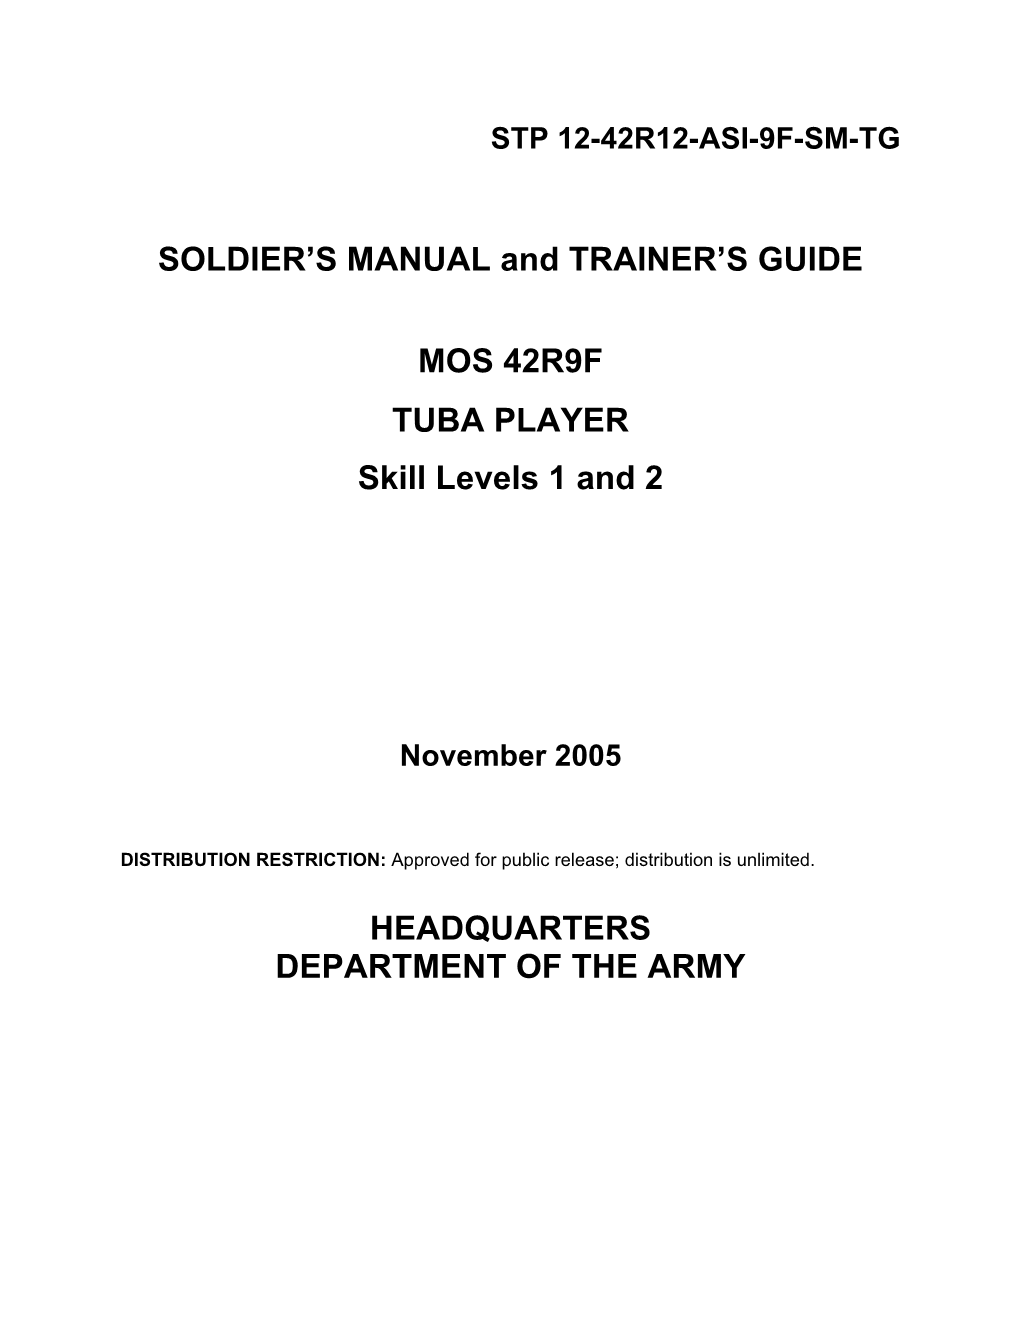 SOLDIER's MANUAL and TRAINER's GUIDE MOS 42R9F TUBA